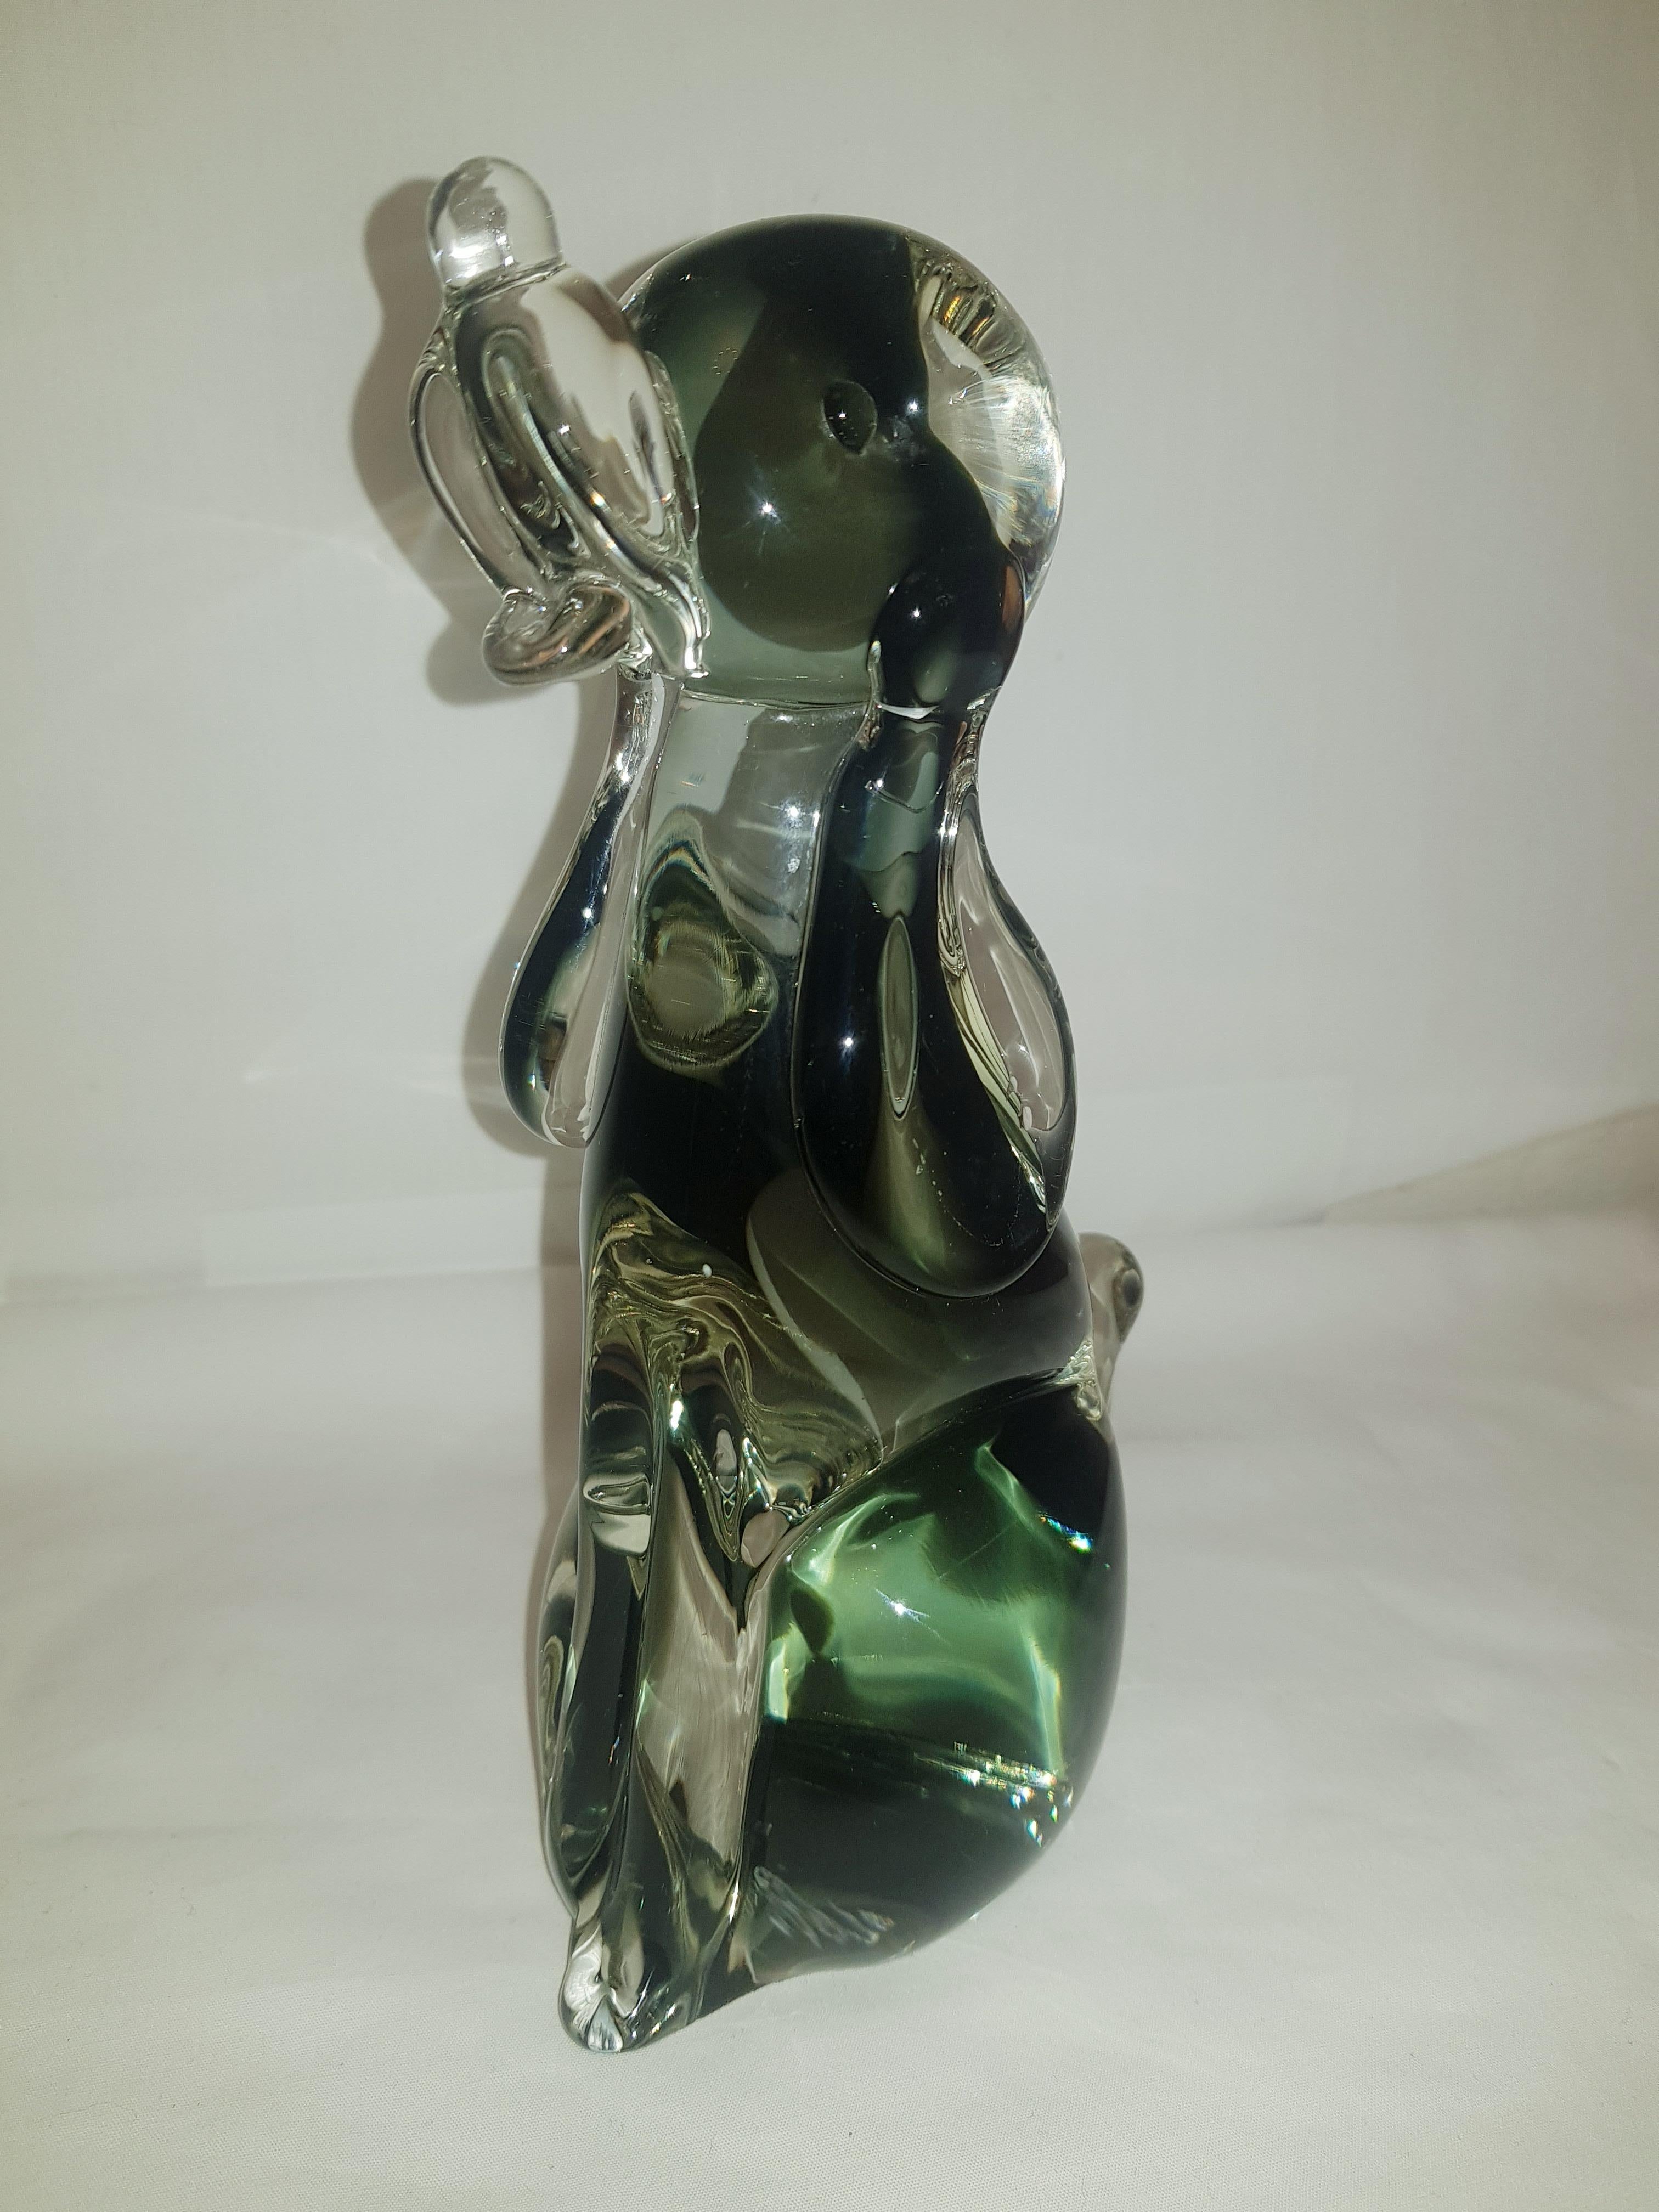 Beautiful vitange murano glass somerso dog green and clear by Vincenzo Nason brilliant condition.